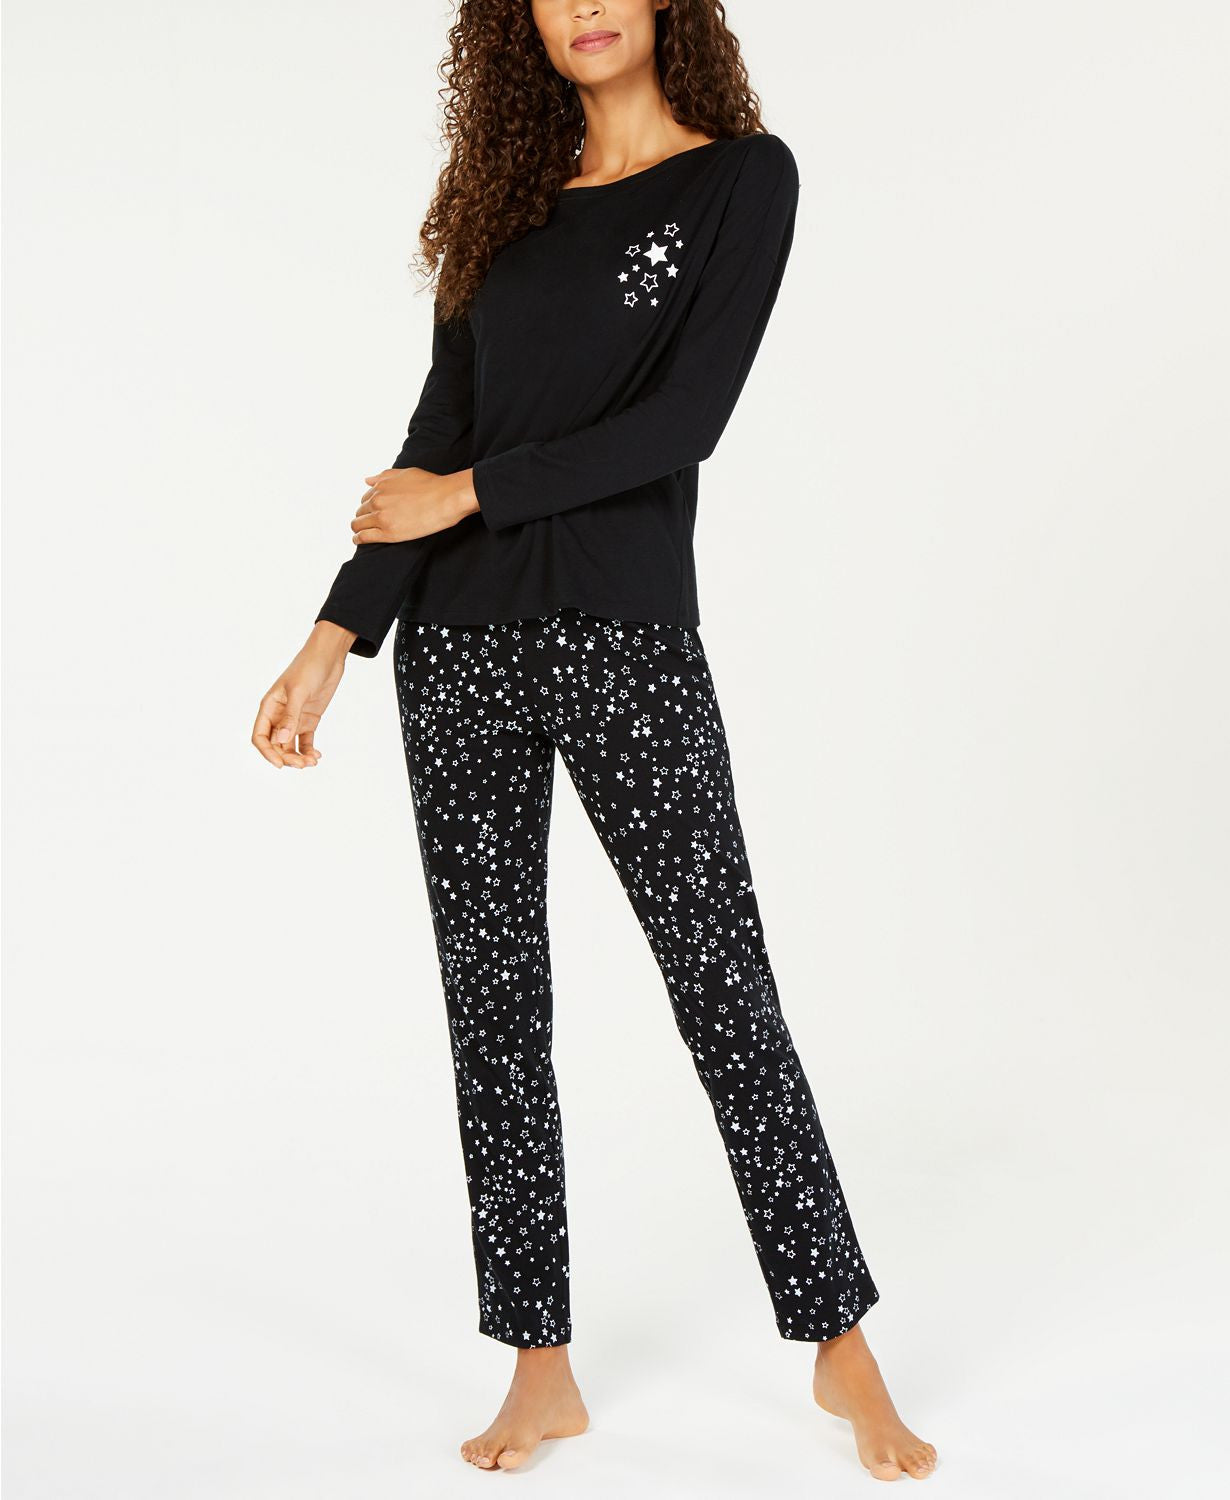 Jenni Cotton Graphic Top / Pants PJ Set in Scattered Stars